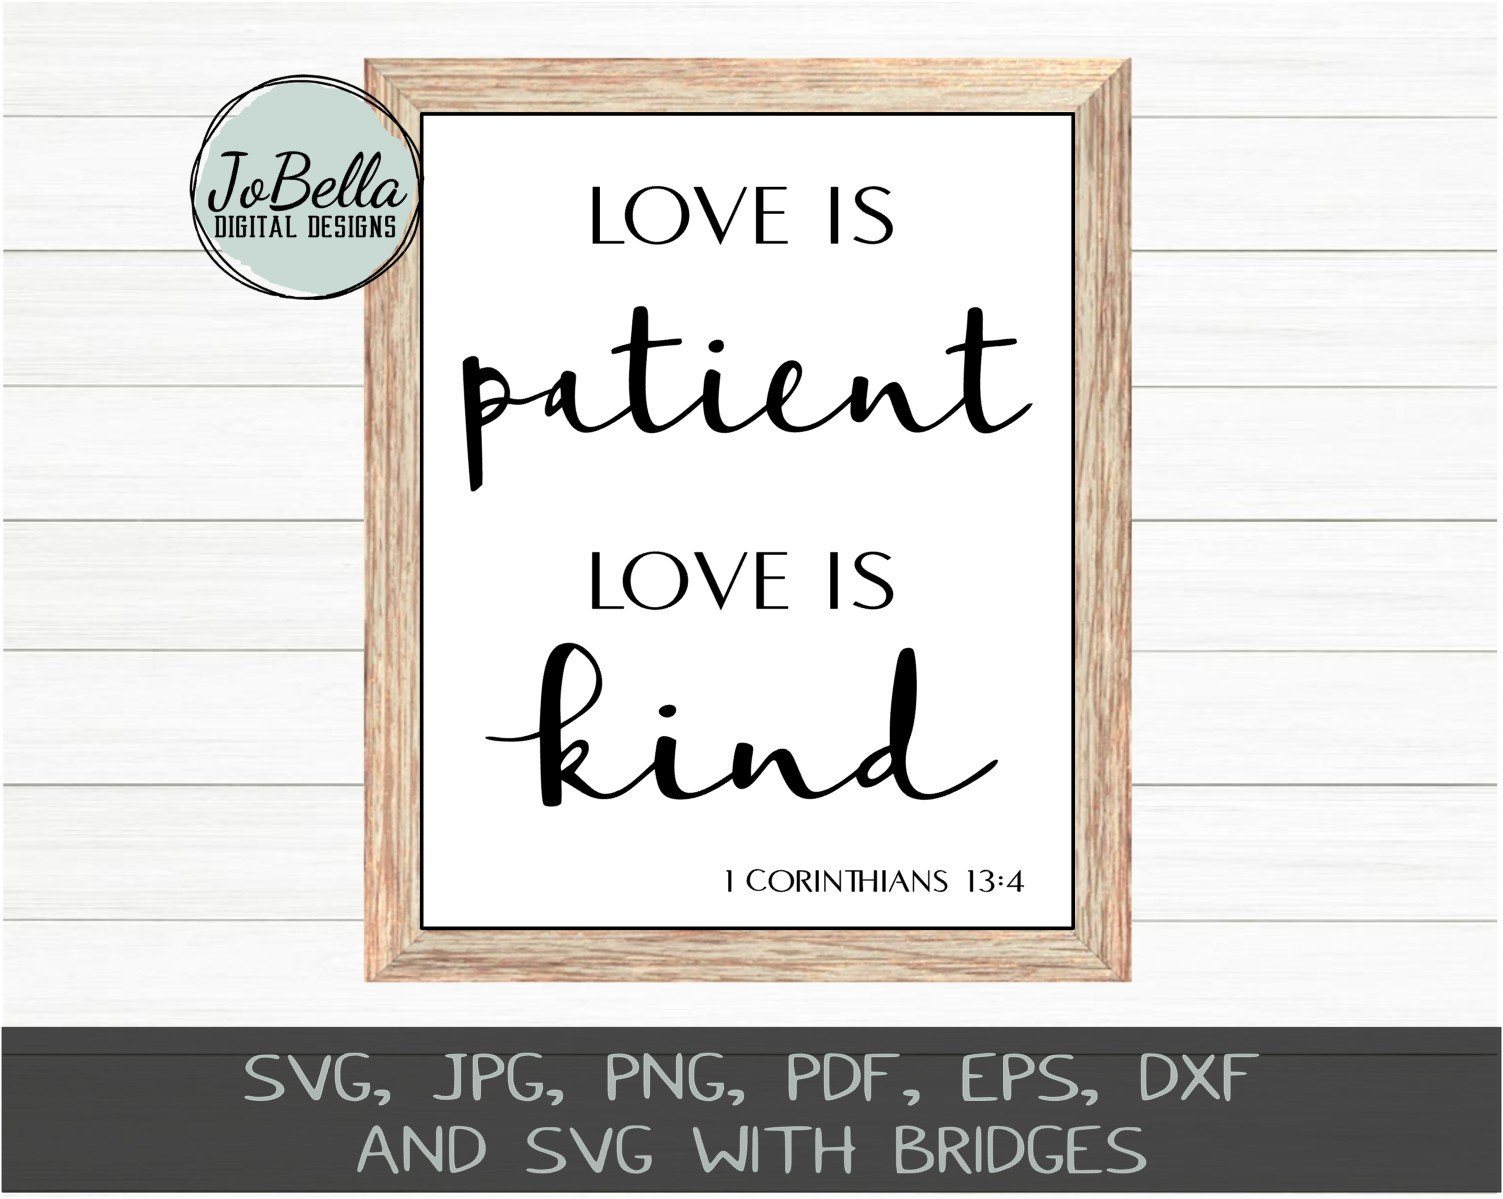 Download Love Is Kind Svg Valentine S Day Svg Anniversary Sign Clip Art Love Is Patient Svg Png Jpeg Over The Bed Sign Svg Romantic Quote Svg Clip Art Art Collectibles Vadel Com